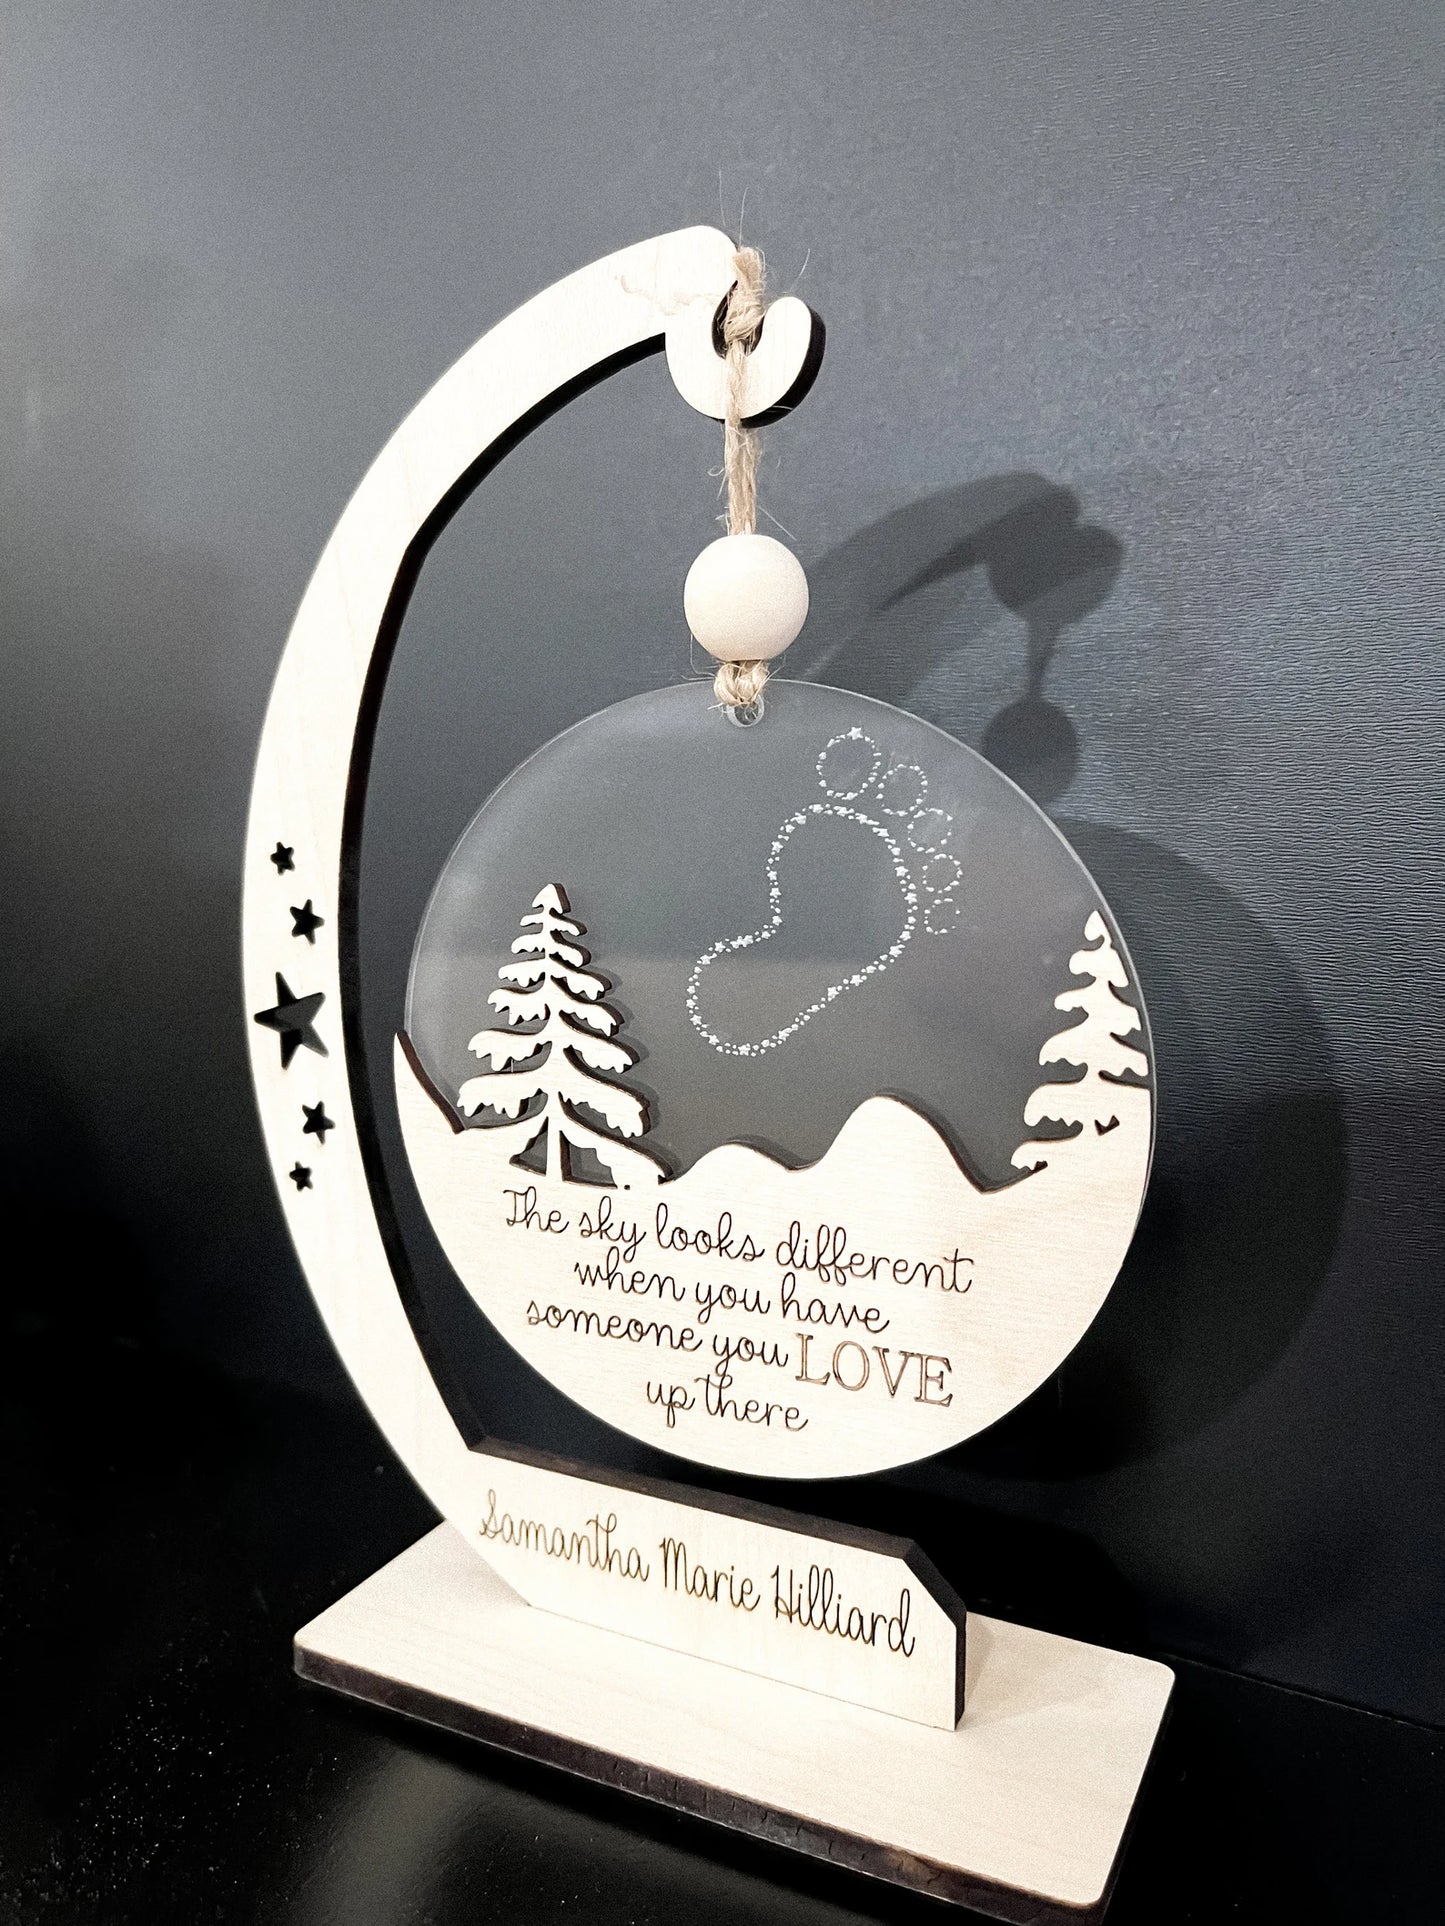 Customizable Baby Memorial "The Sky Looks Different When You Have Someone You Love Up There" Footprint Ornament & Stand Laser Digital File